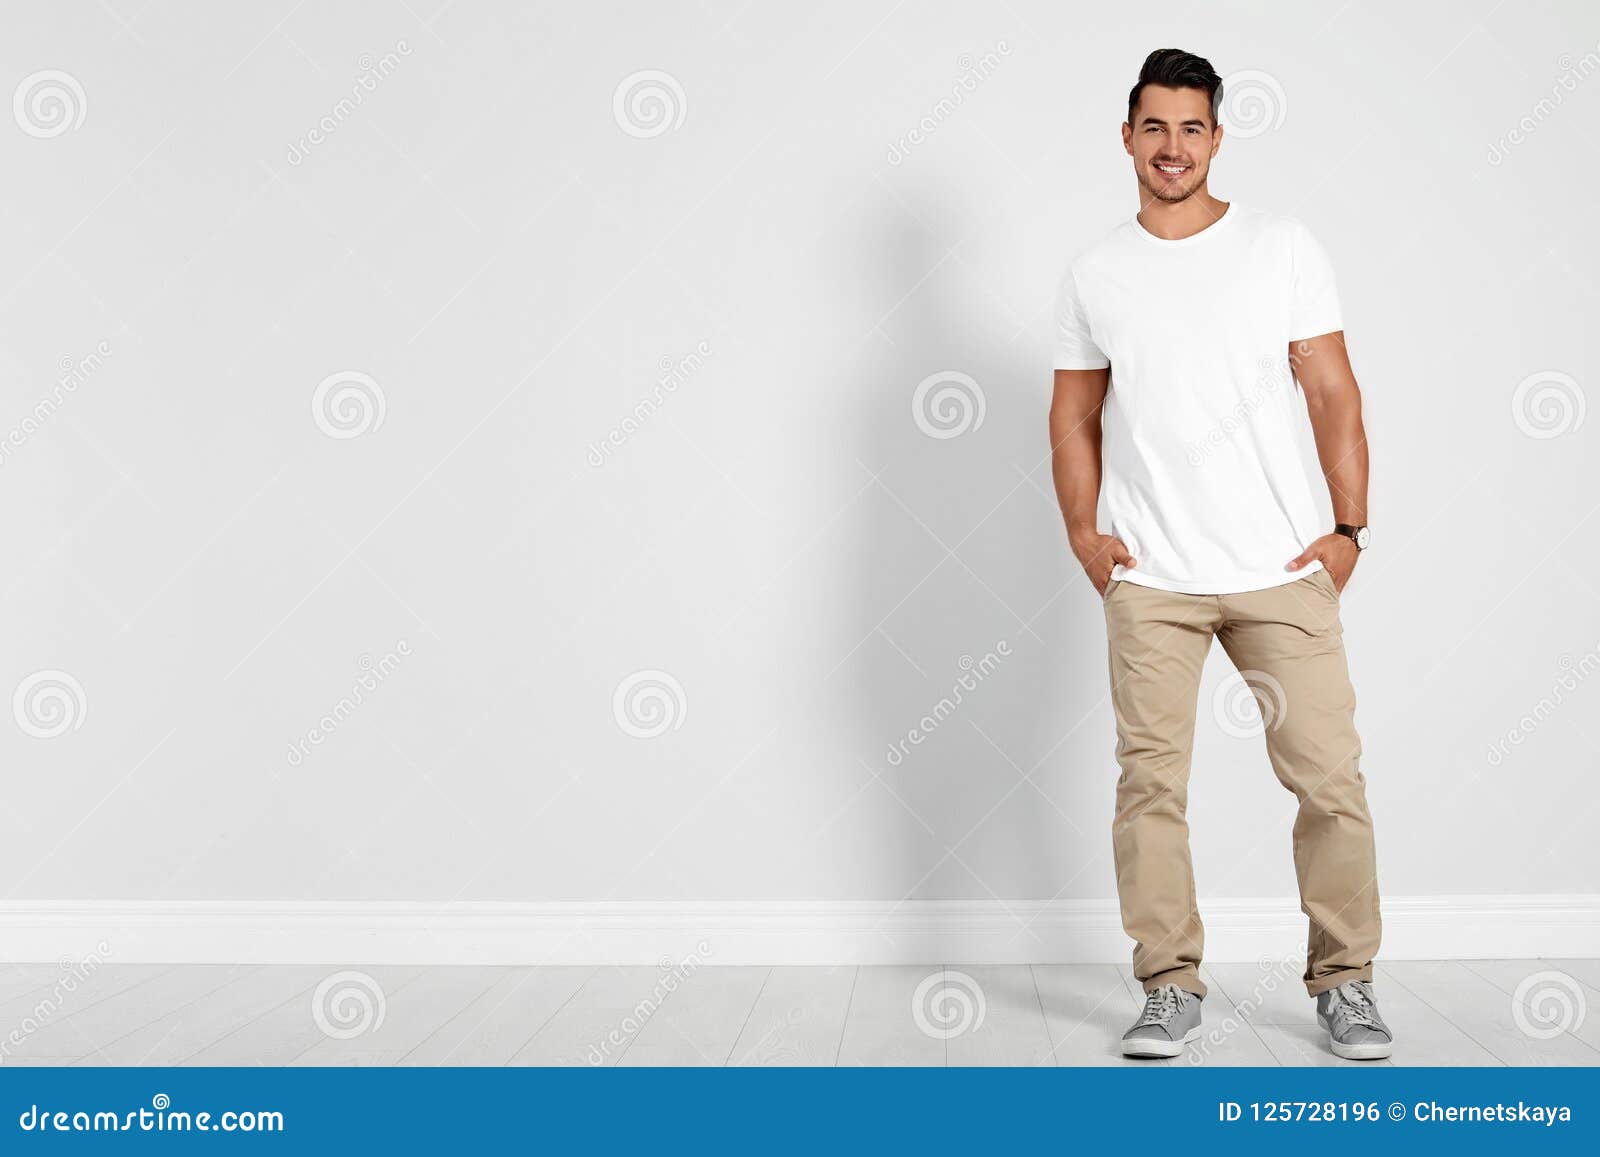 Full Length Portrait of Handsome Young Man Stock Photo - Image of ...